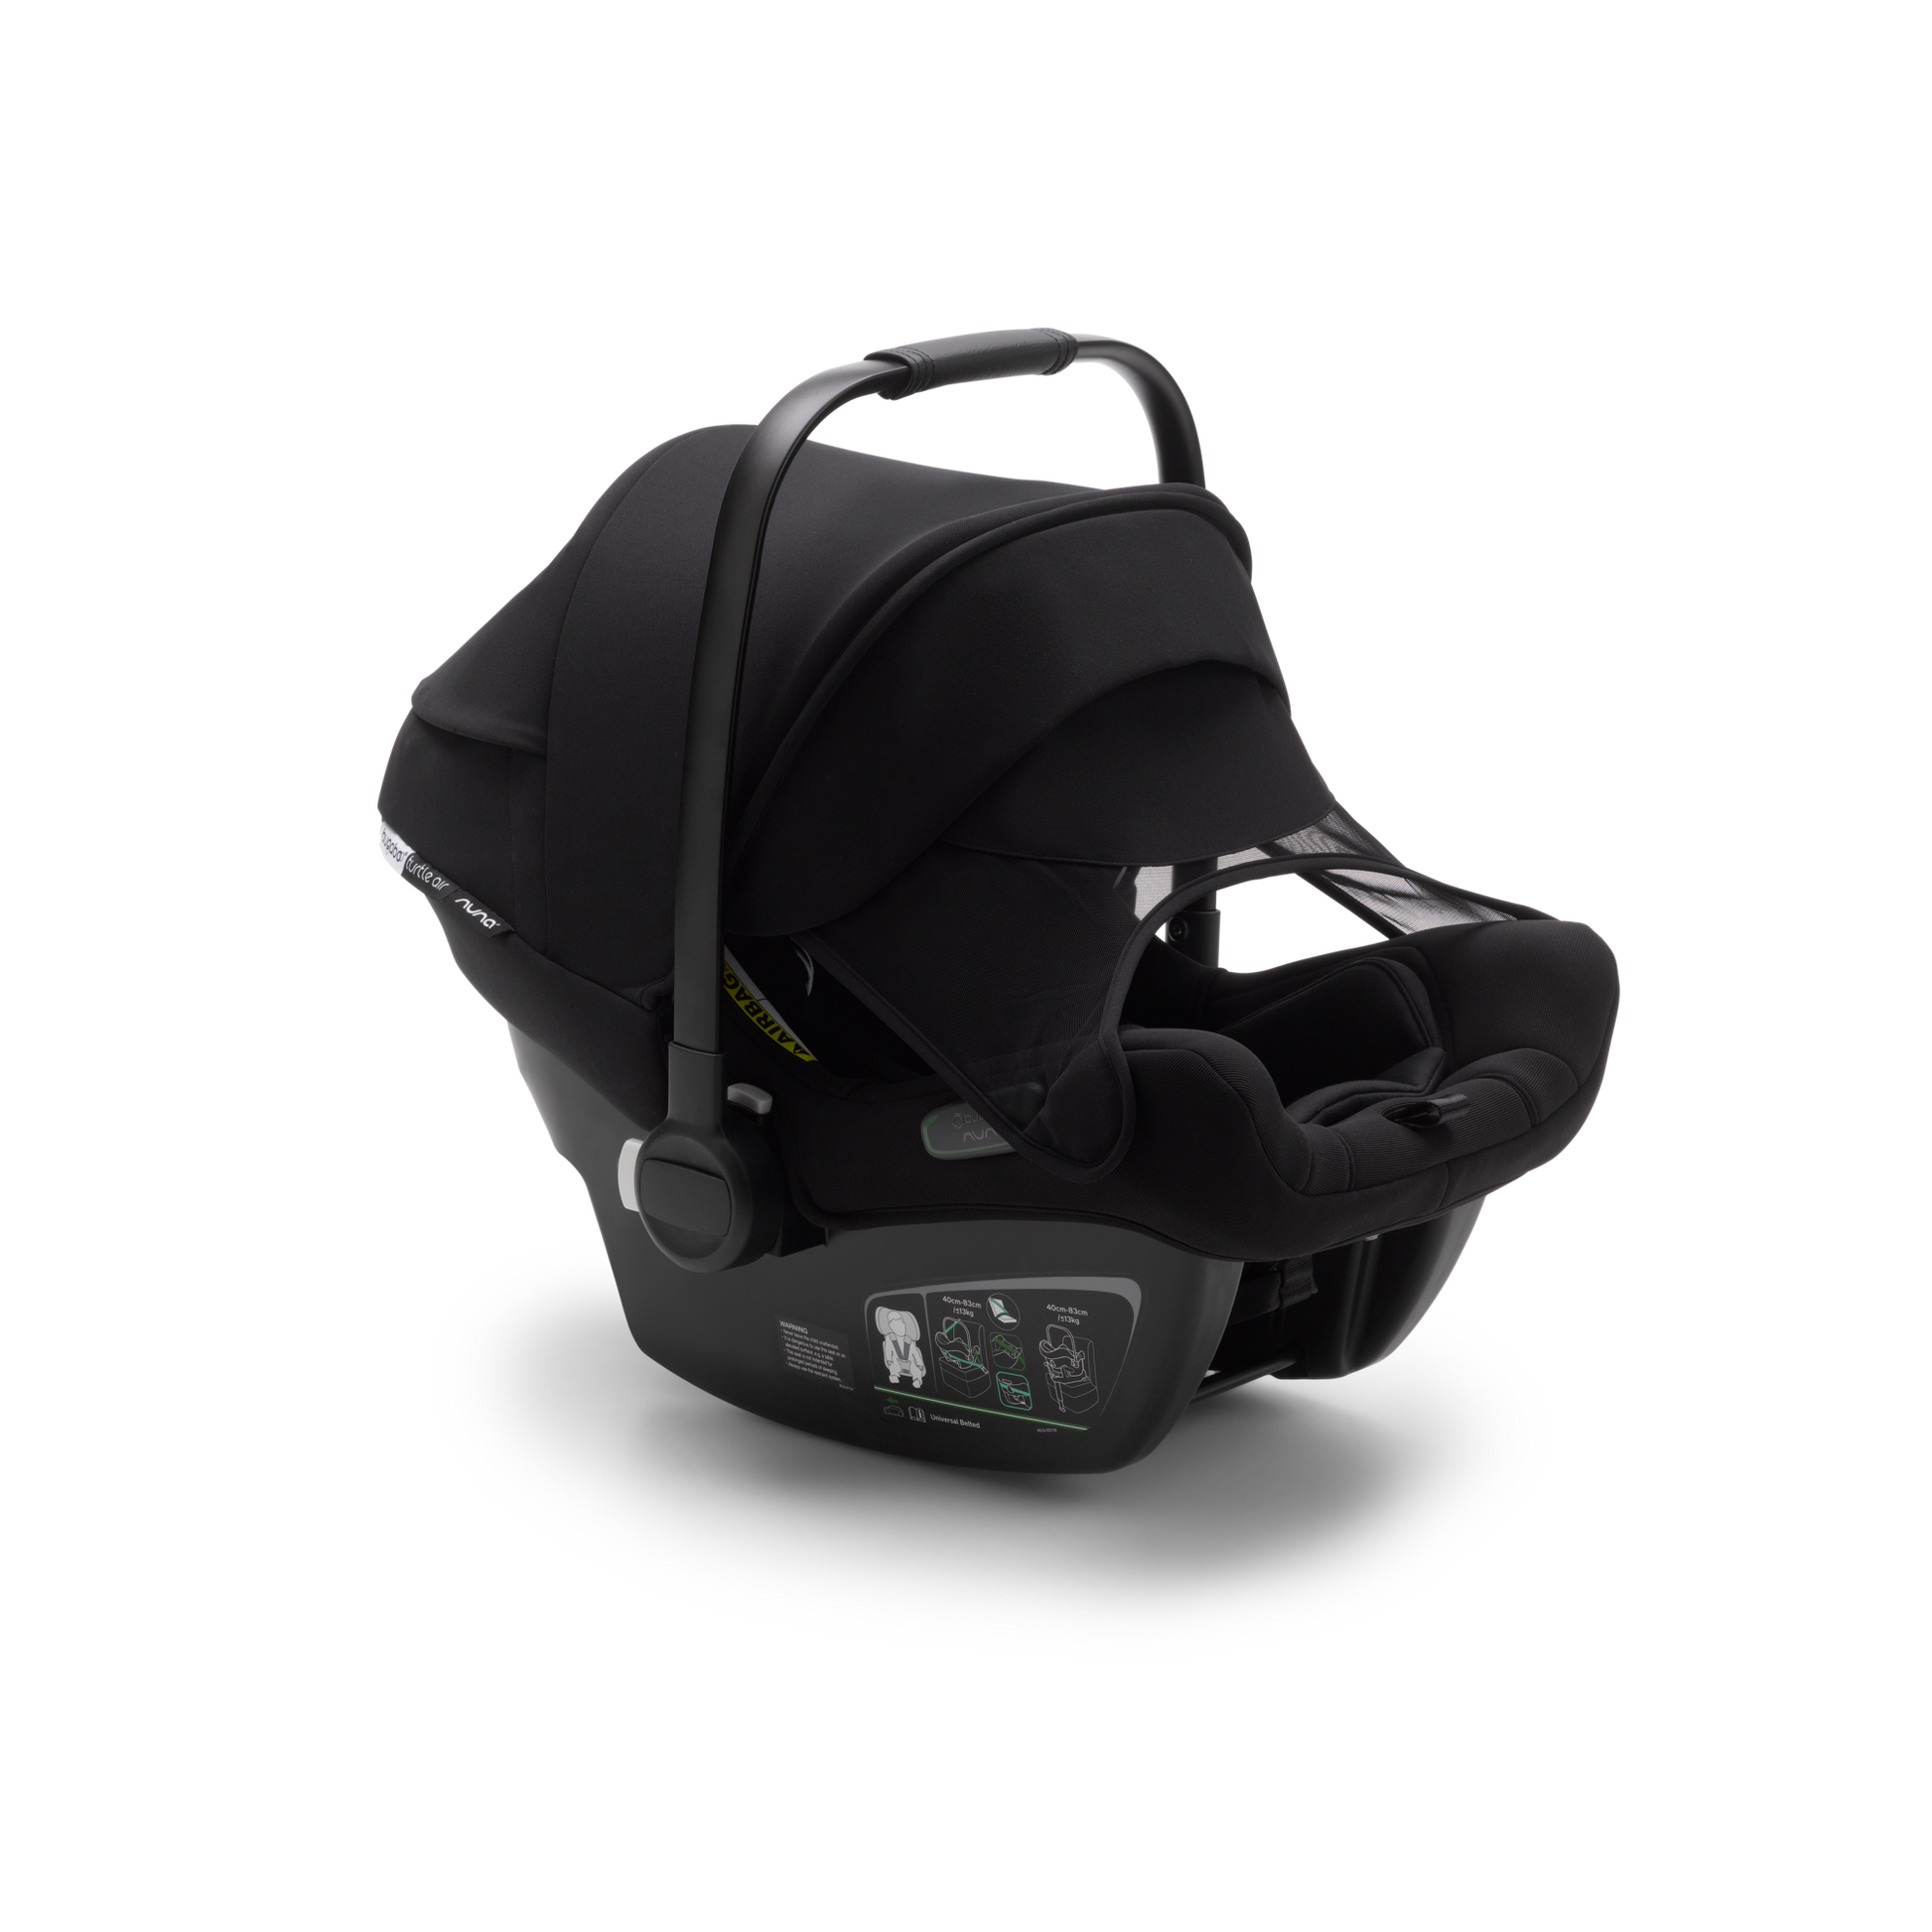 Bugaboo Donkey 5 Twin Pushchair & Turtle Air 360 Travel System - Graphite / Stormy Blue